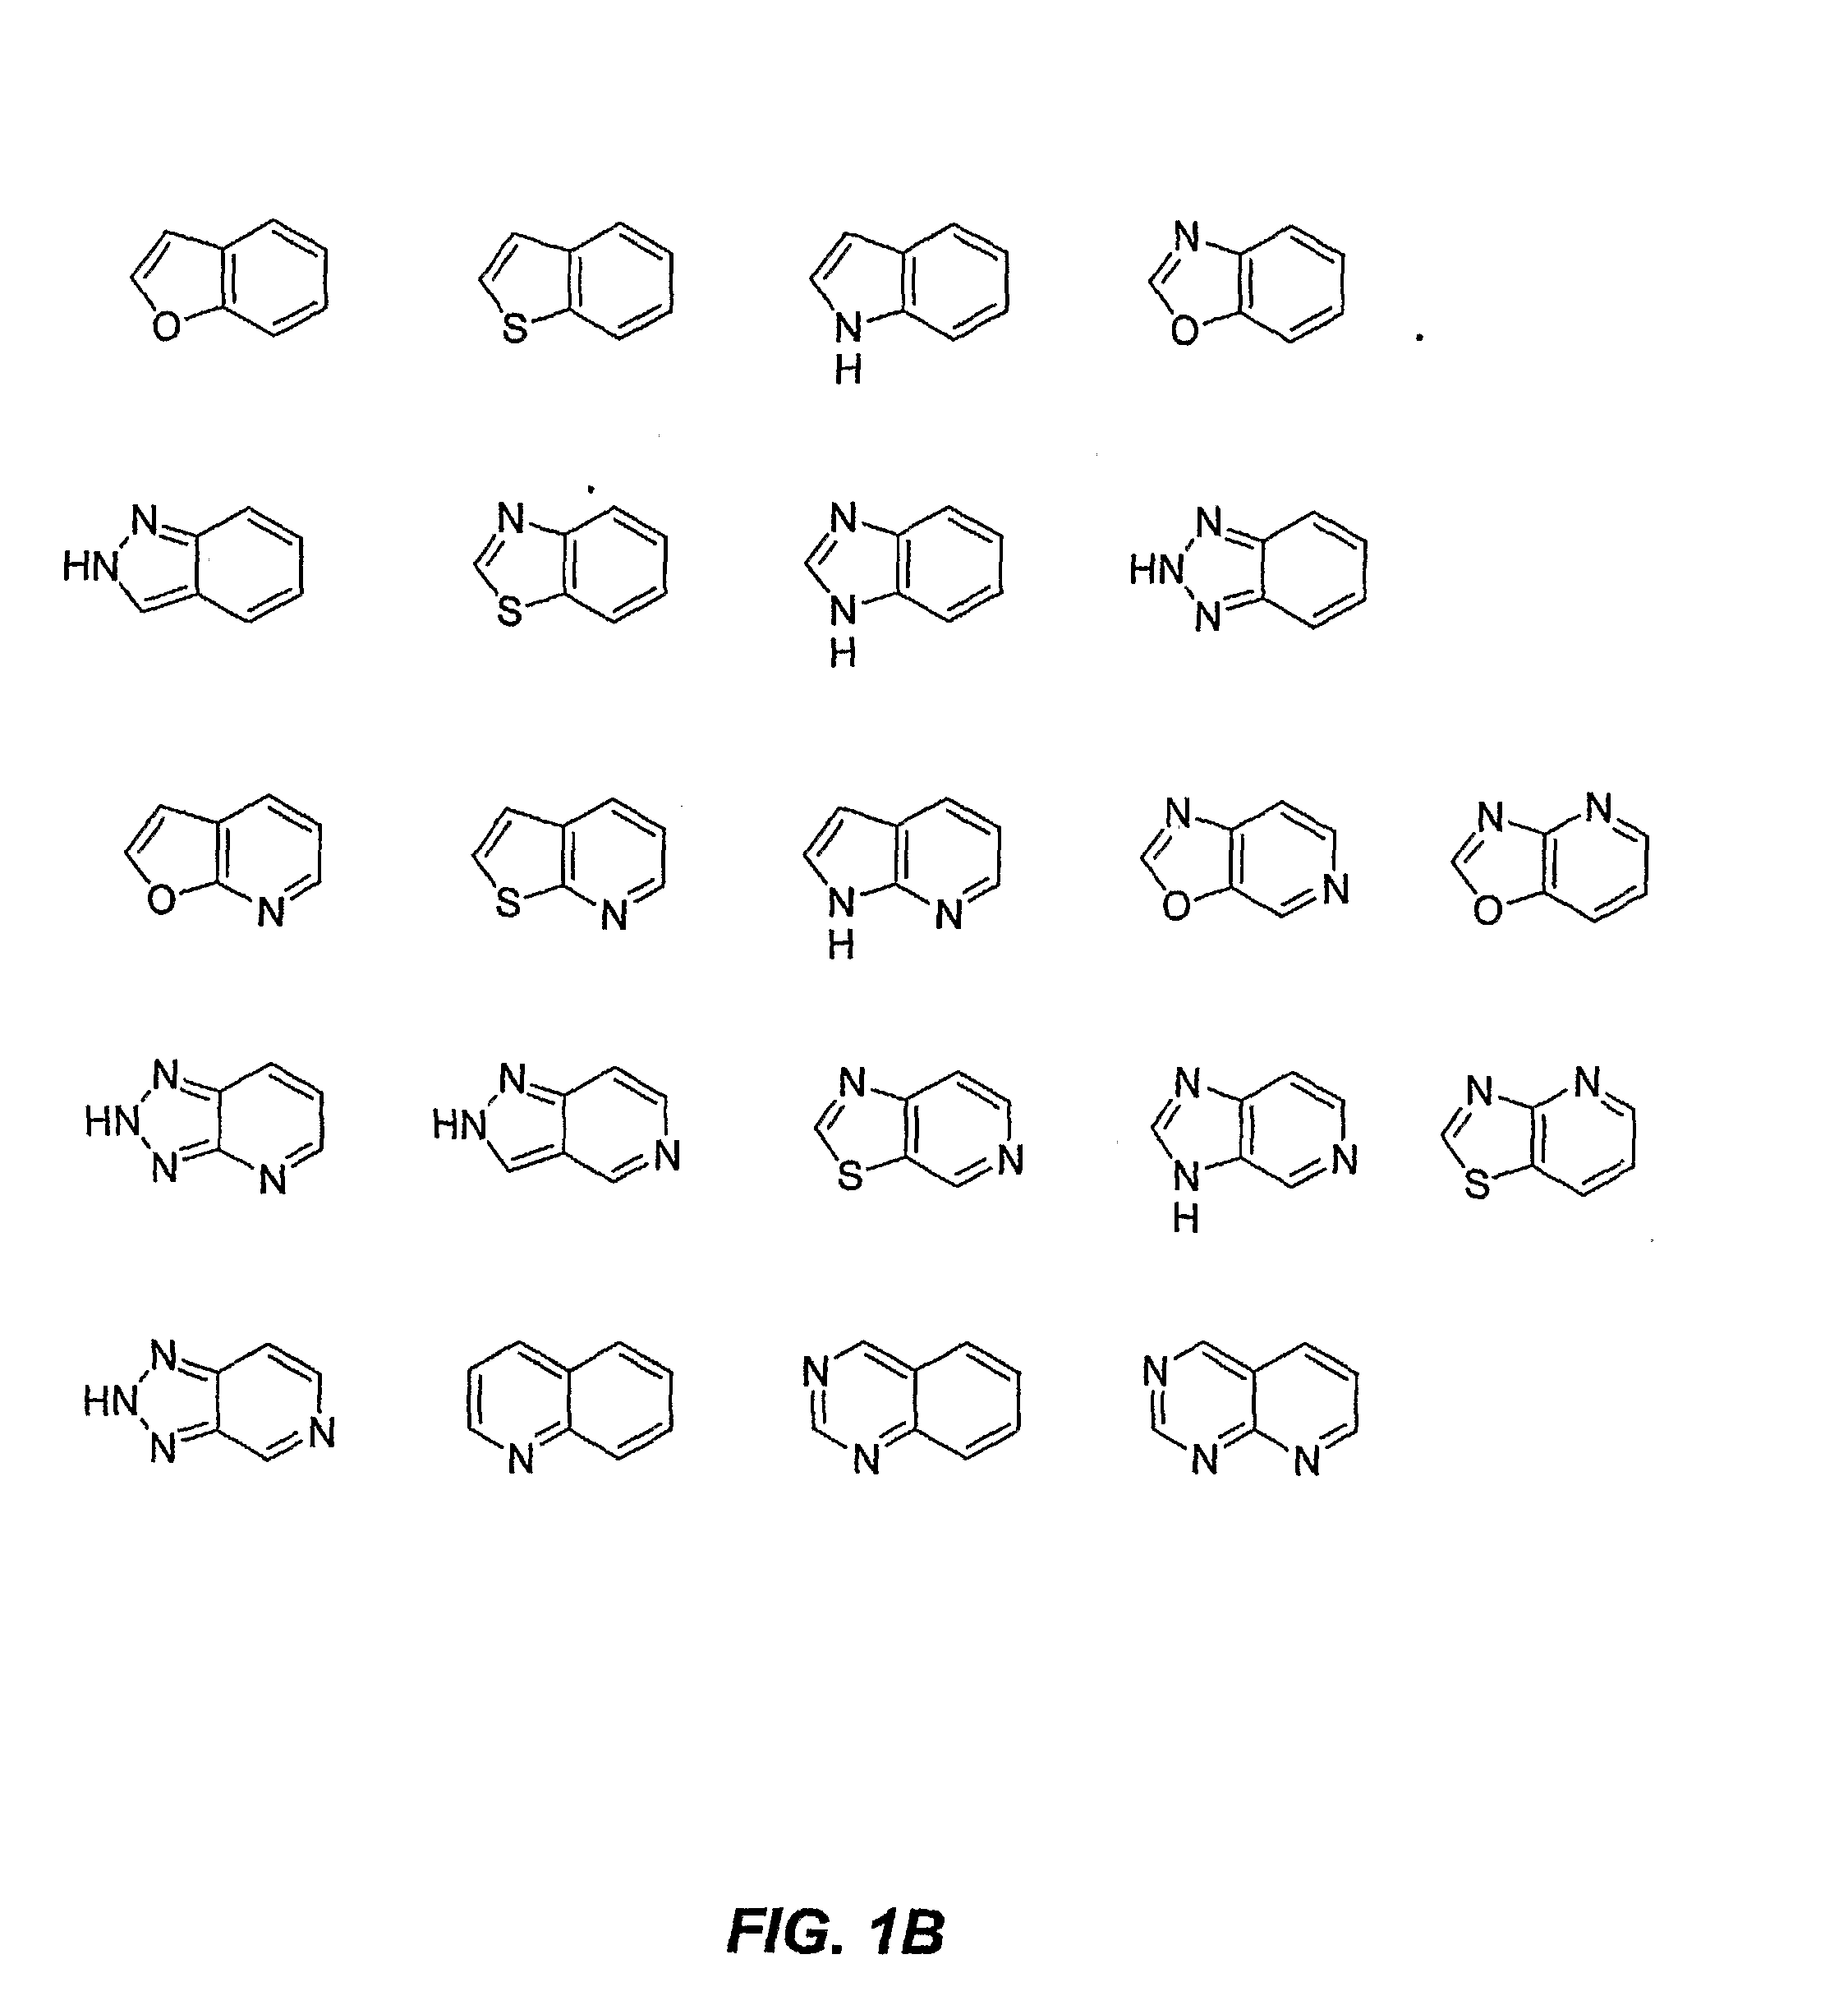 Methods For Avoiding Edema in the Treatment of Metabolic, Inflammatory, and Cardiovascular Disorders